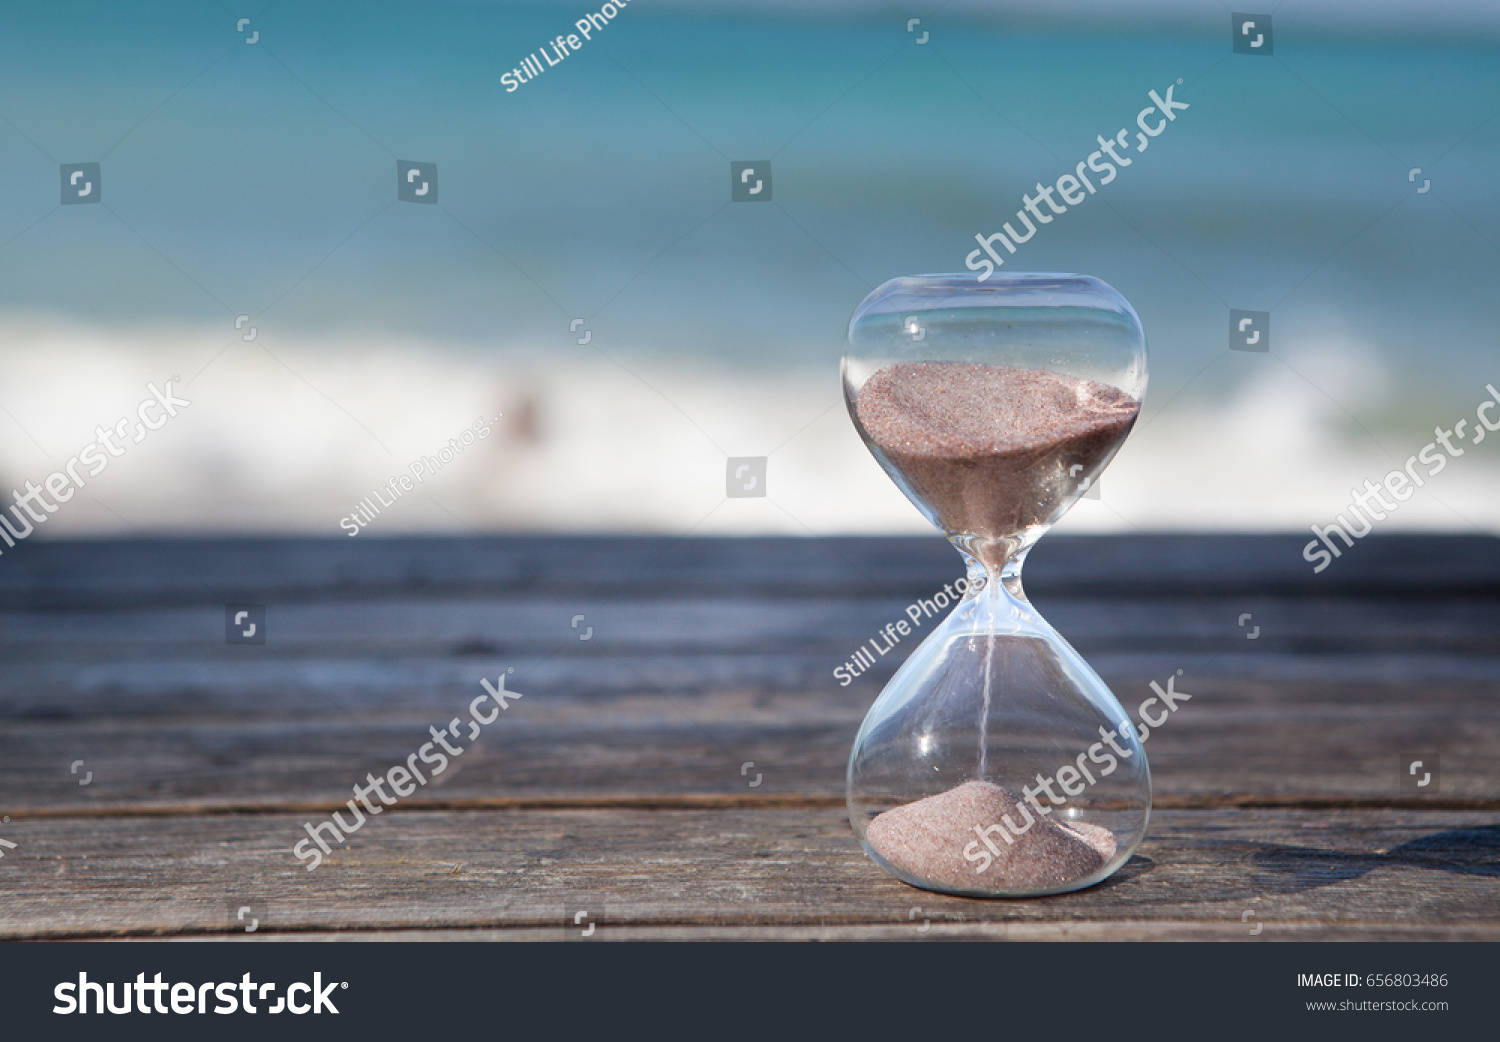 Sand running through the bulbs of an hourglass measuring the passing time in a countdown to a deadline. Beach and sea background, concept for vacation countdown. Time for relaxation. #656803486